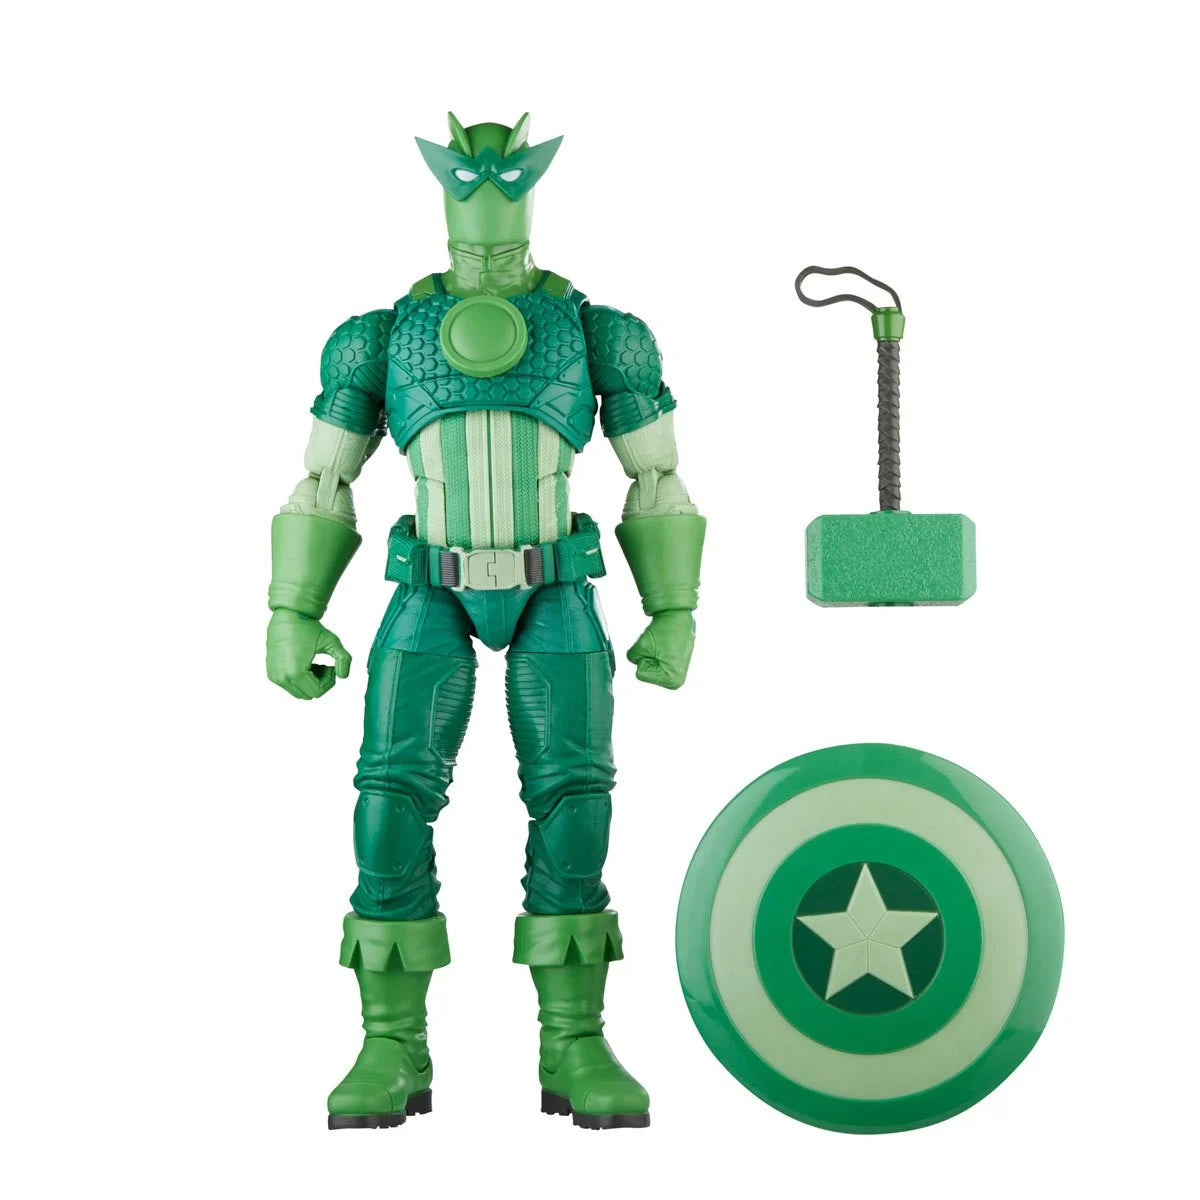 Super-Adaptoid front pose with the Accessories- Heretoserveyou